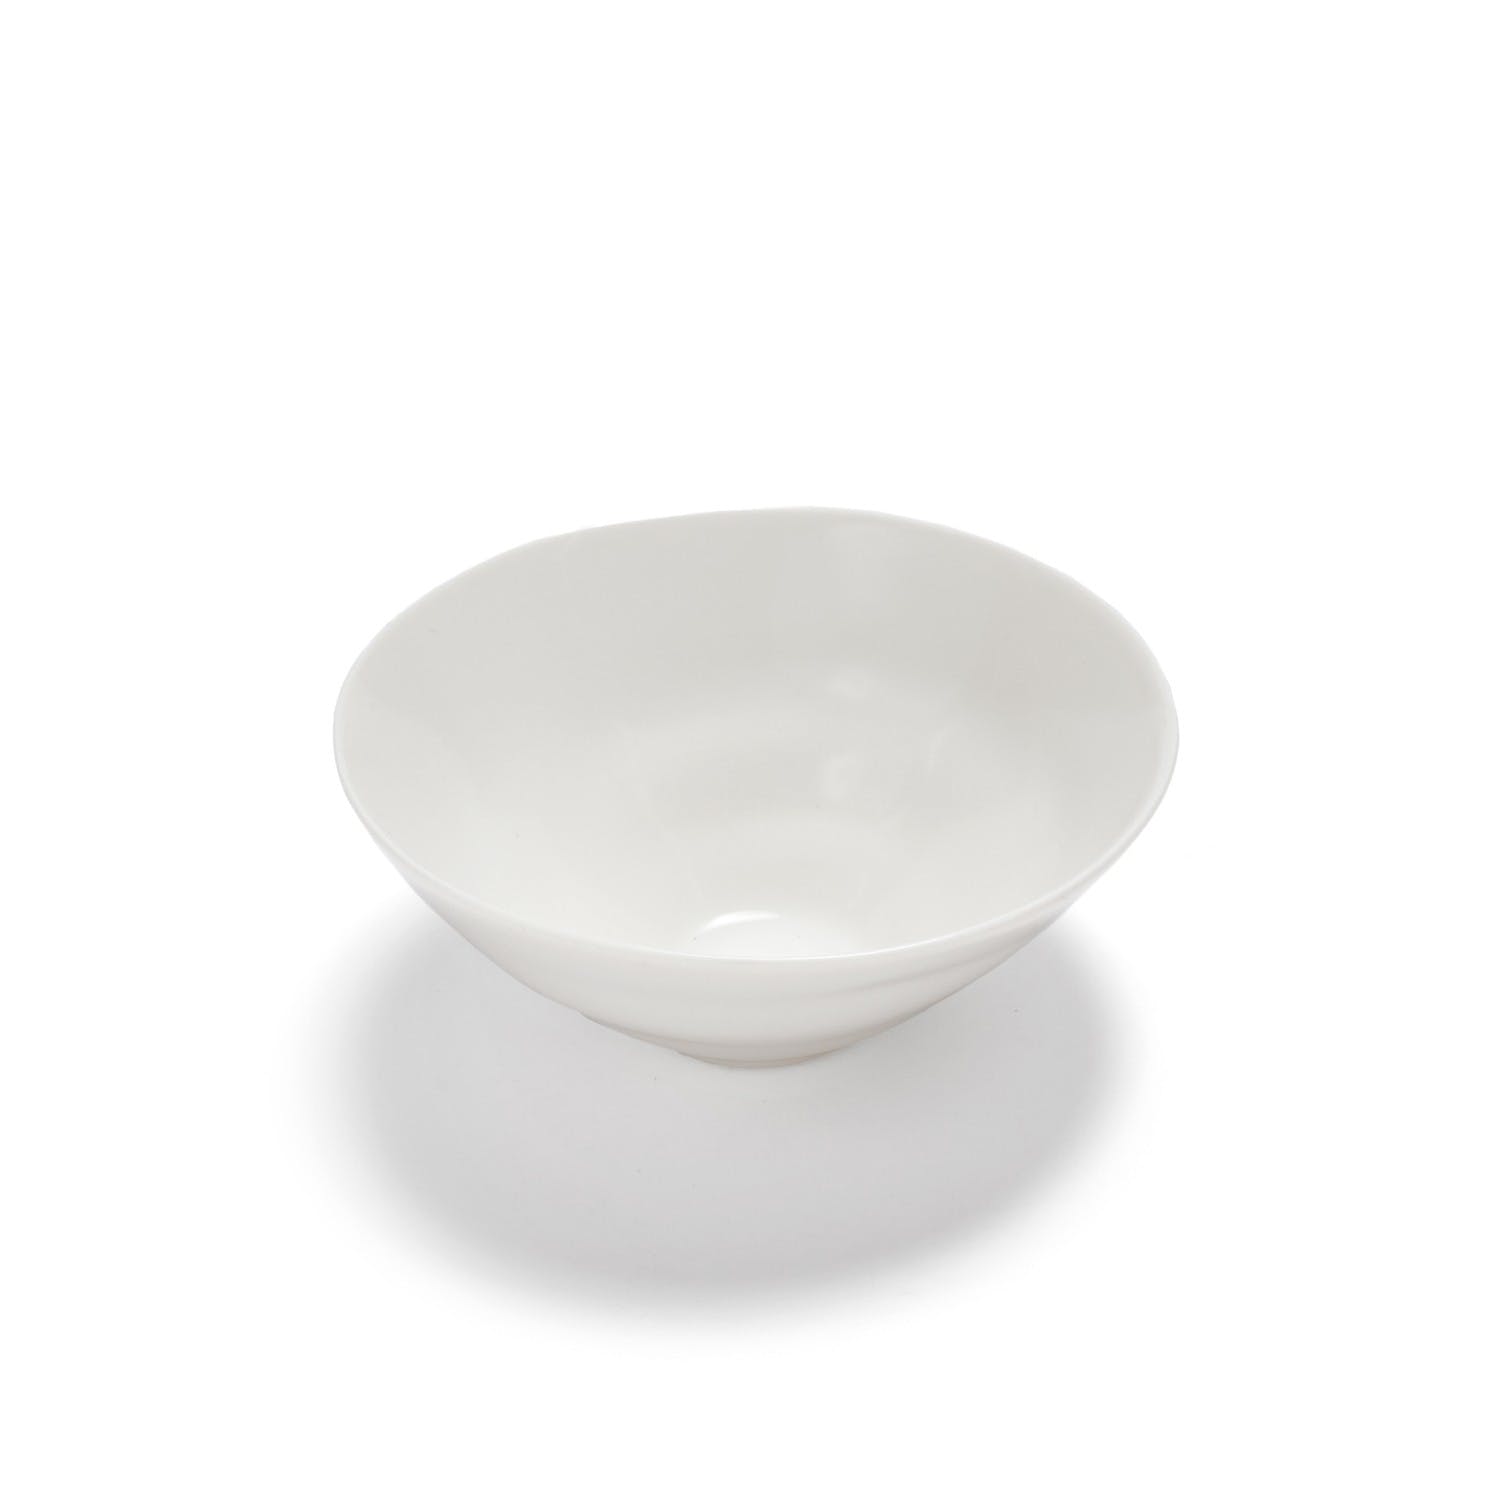 Plain white ceramic bowl with a glossy finish on display.